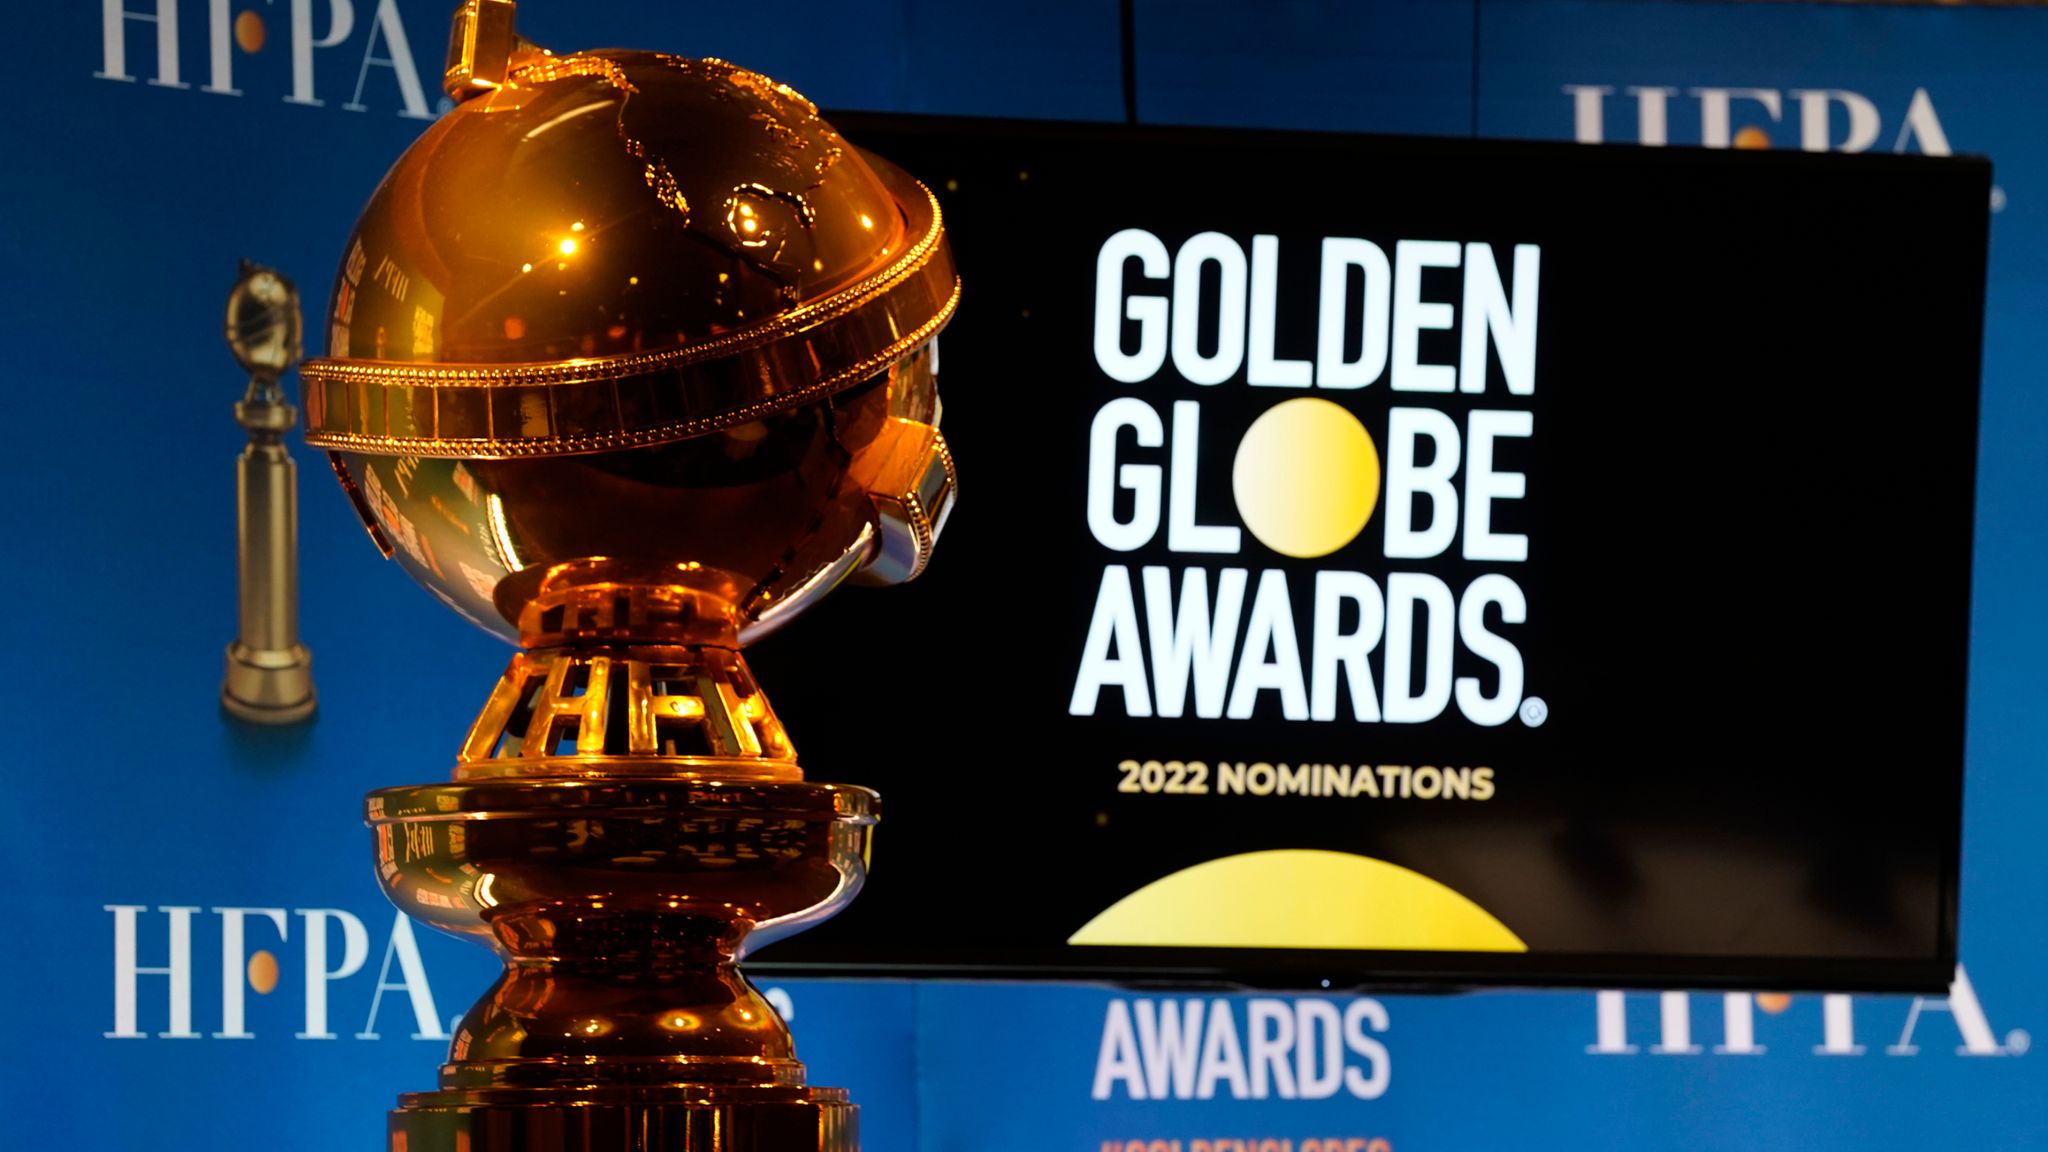 Full Nominee And Award List Of The 2022 Golden Globes